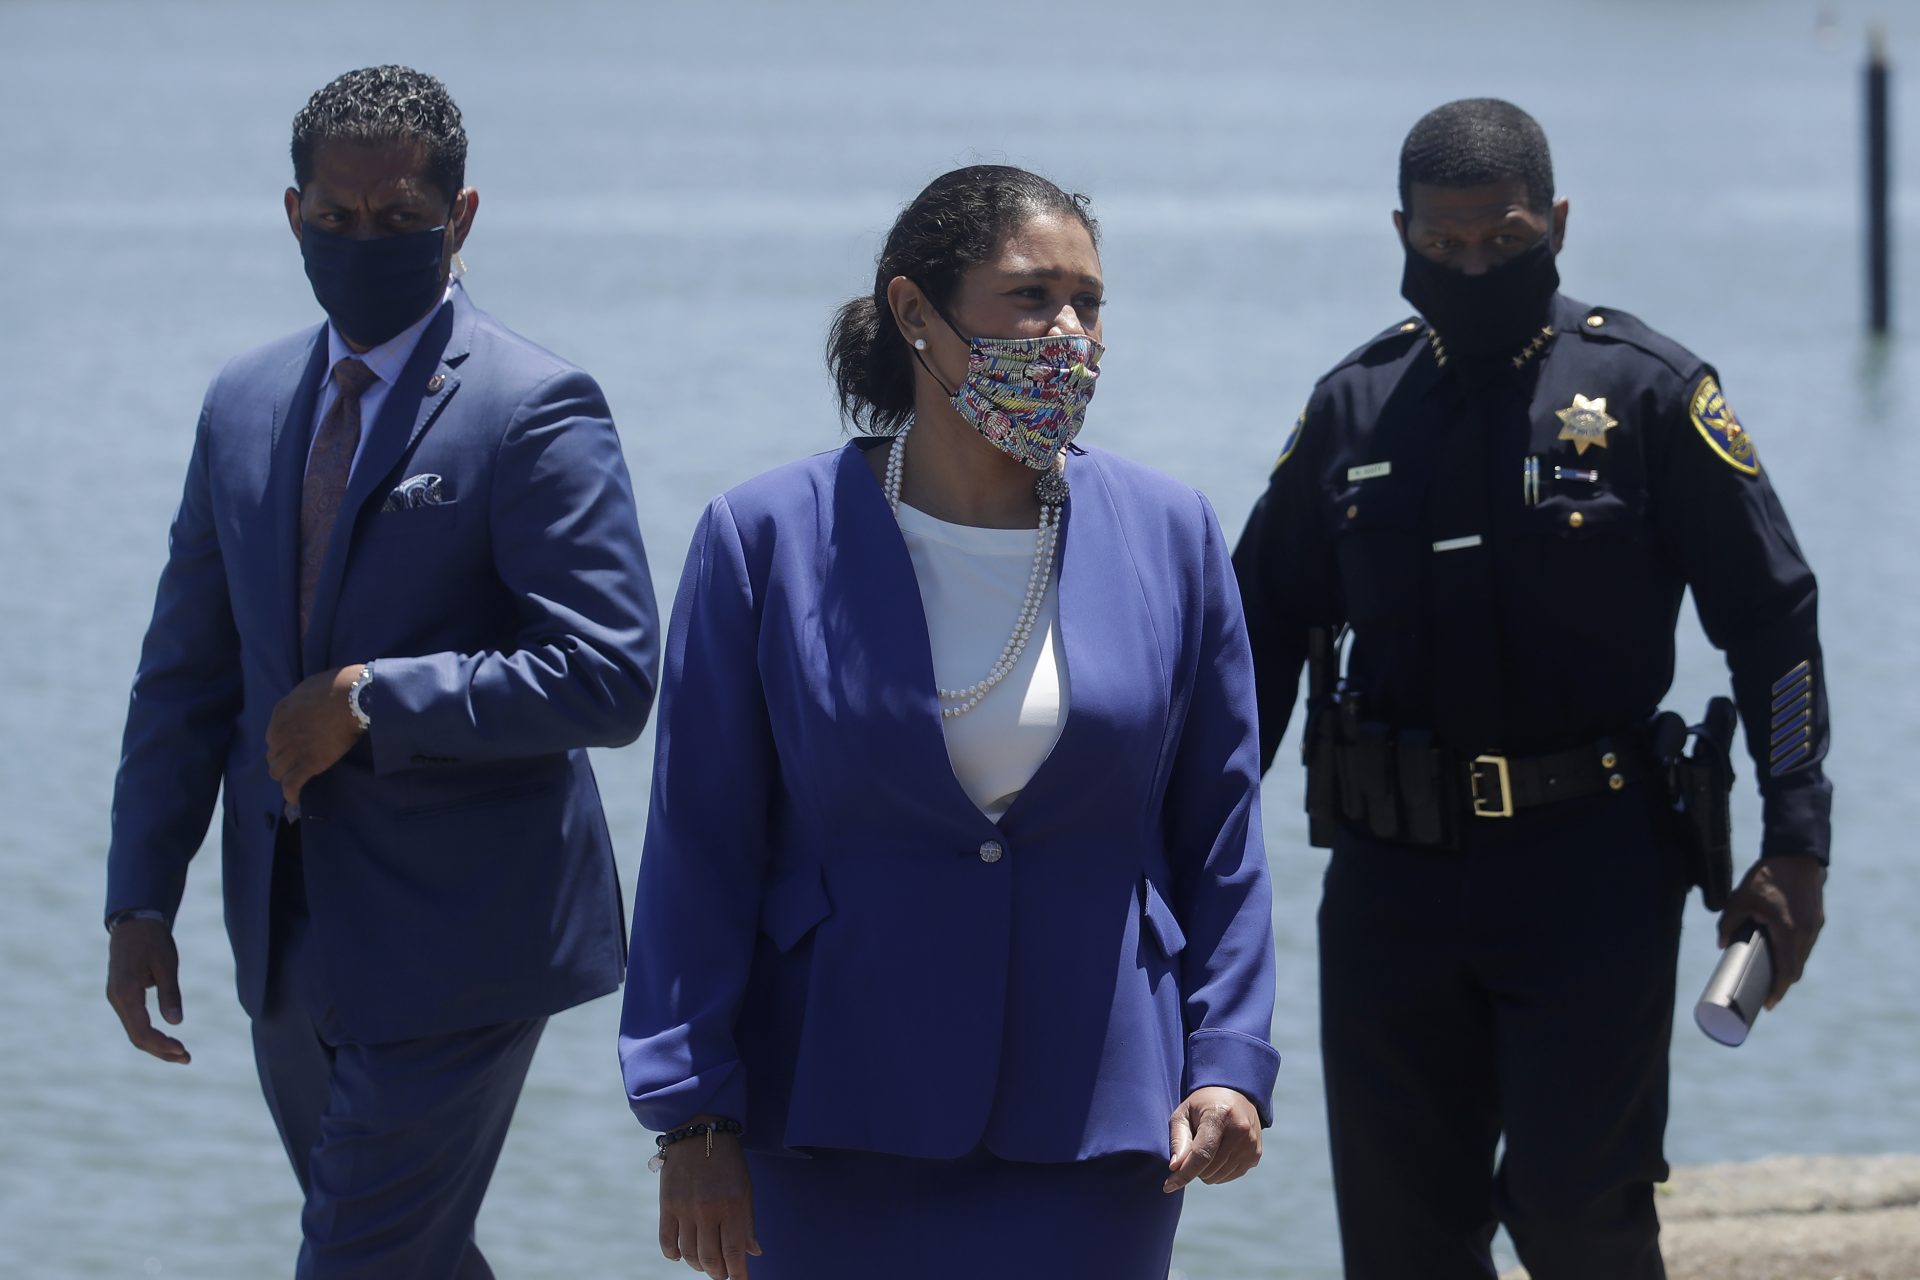 Mayor London Breed, center, and San Francisco Police Chief William Scott, right, arrive at a news conference about the shooting death of Jace Young in San Francisco, Tuesday, July 7, 2020.